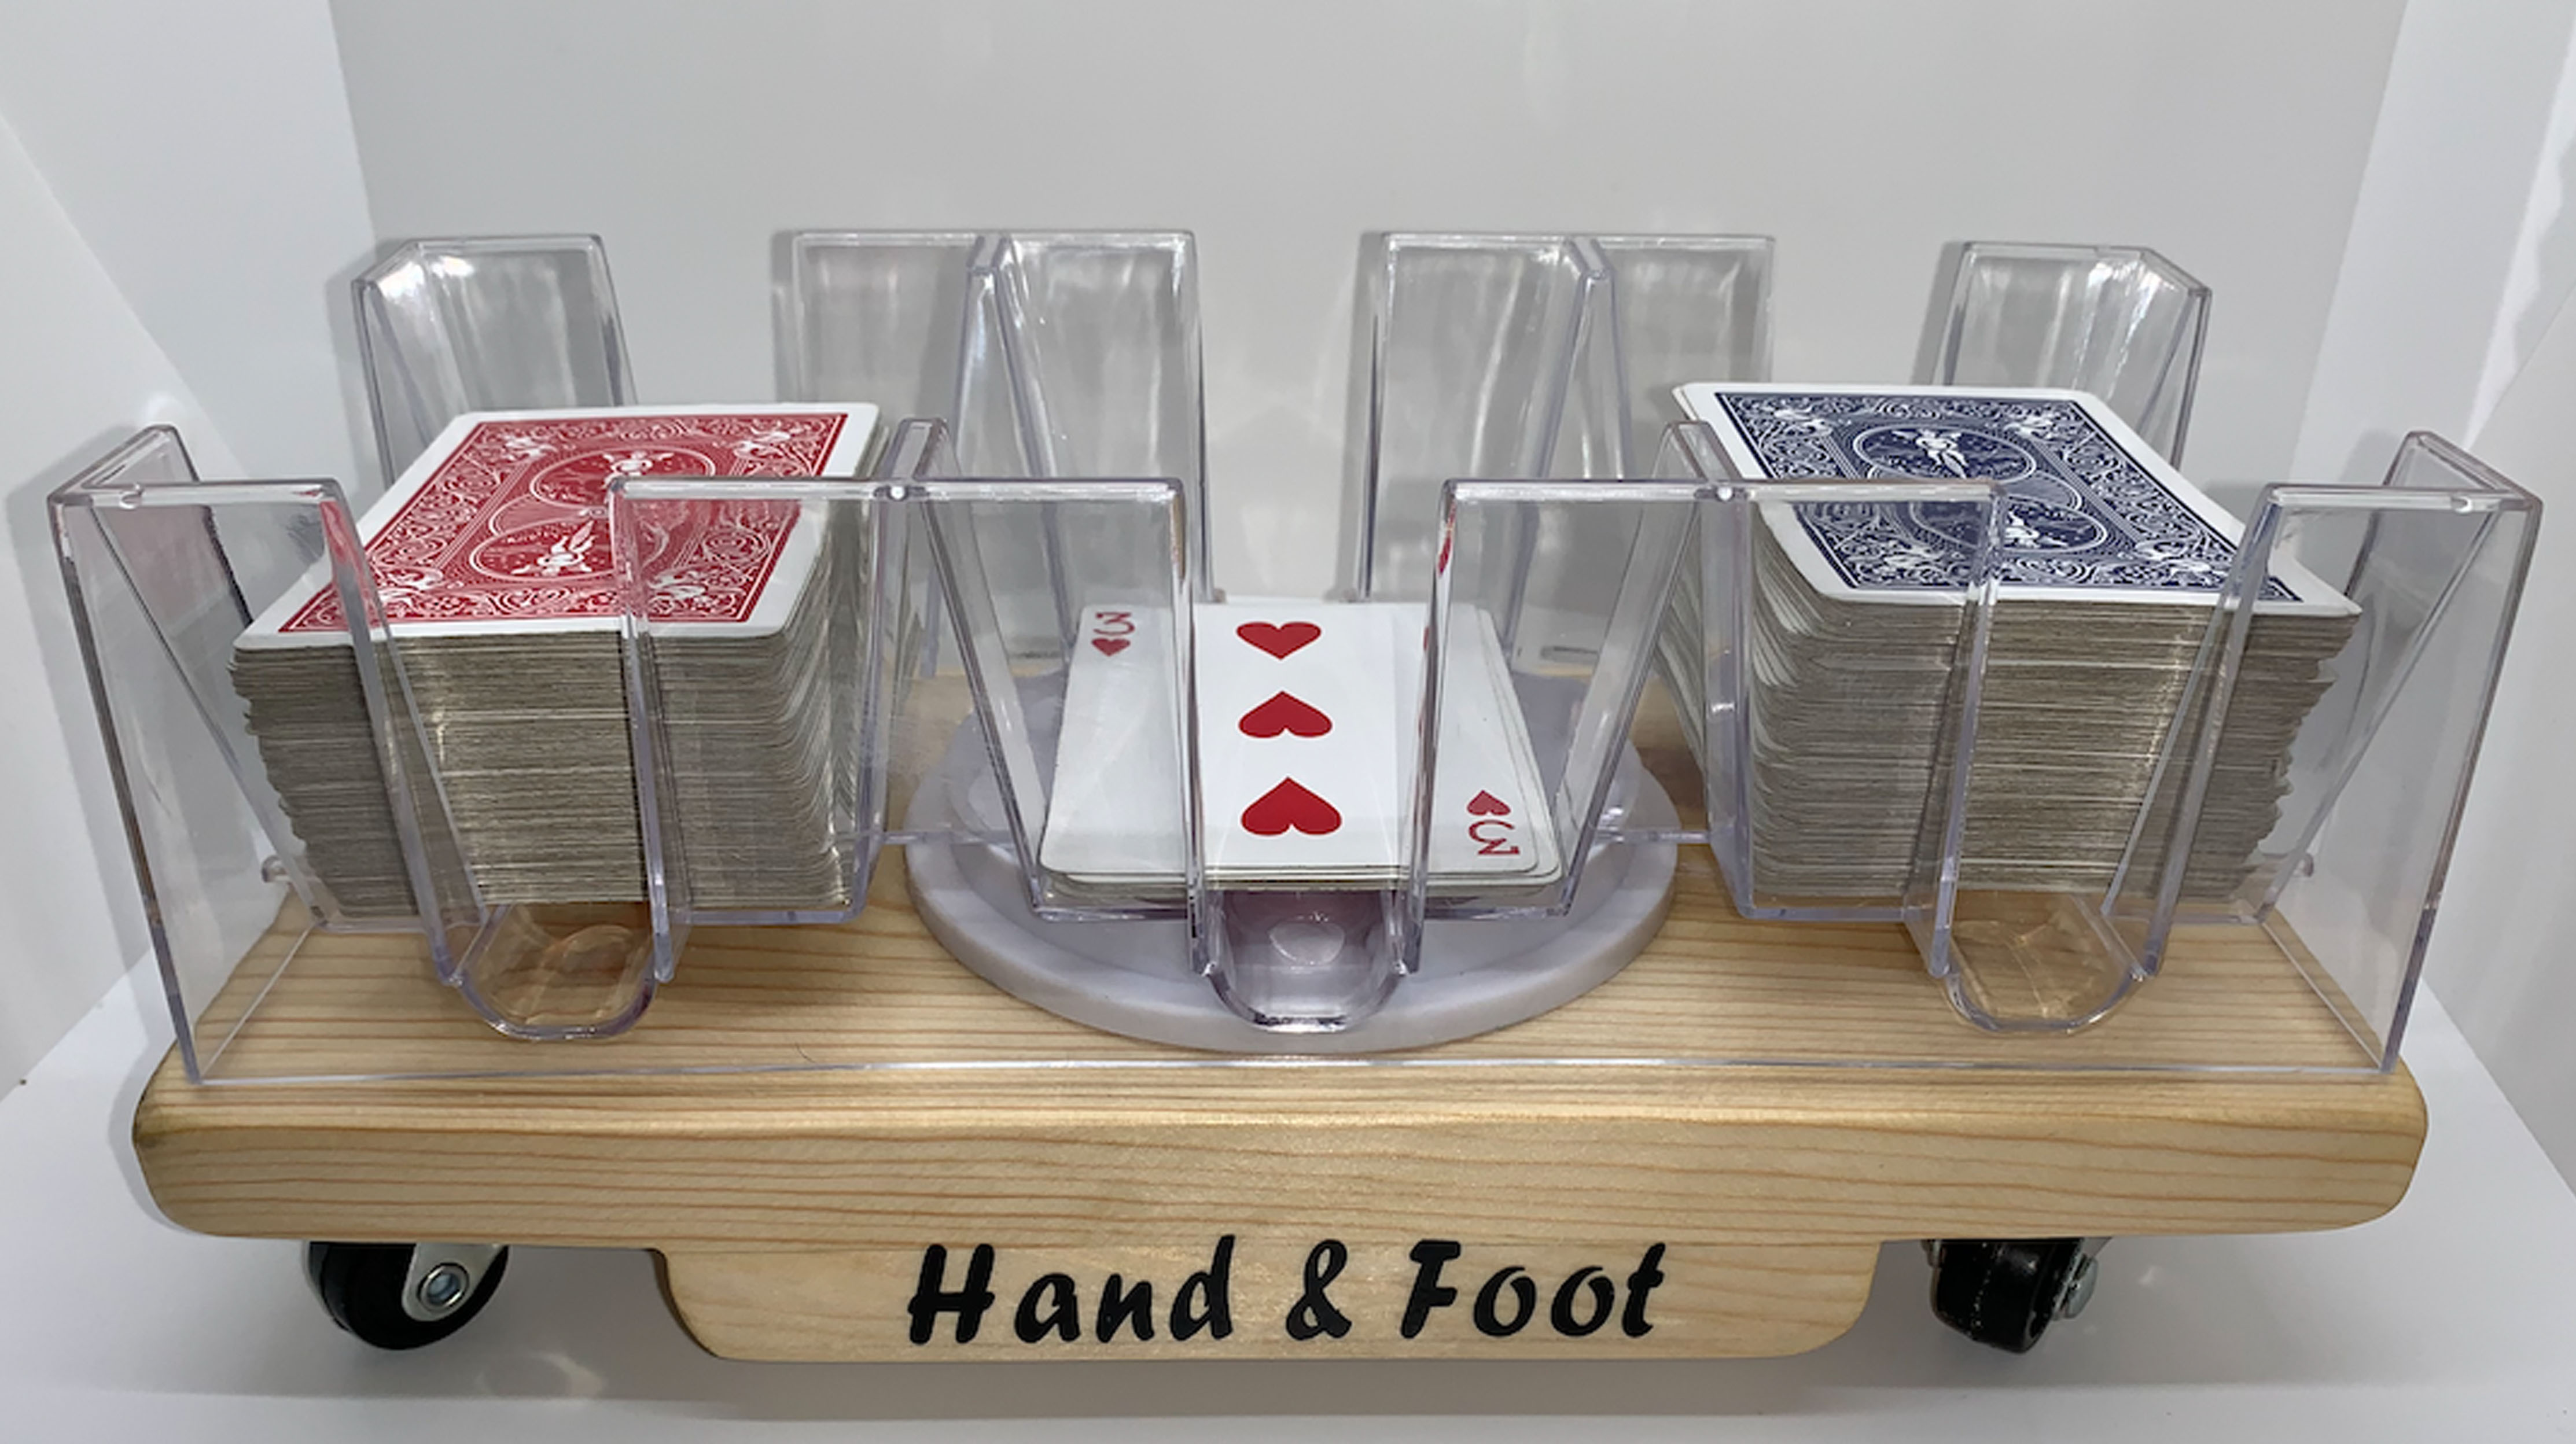 9 Deck 3 Slot Hand and Foot